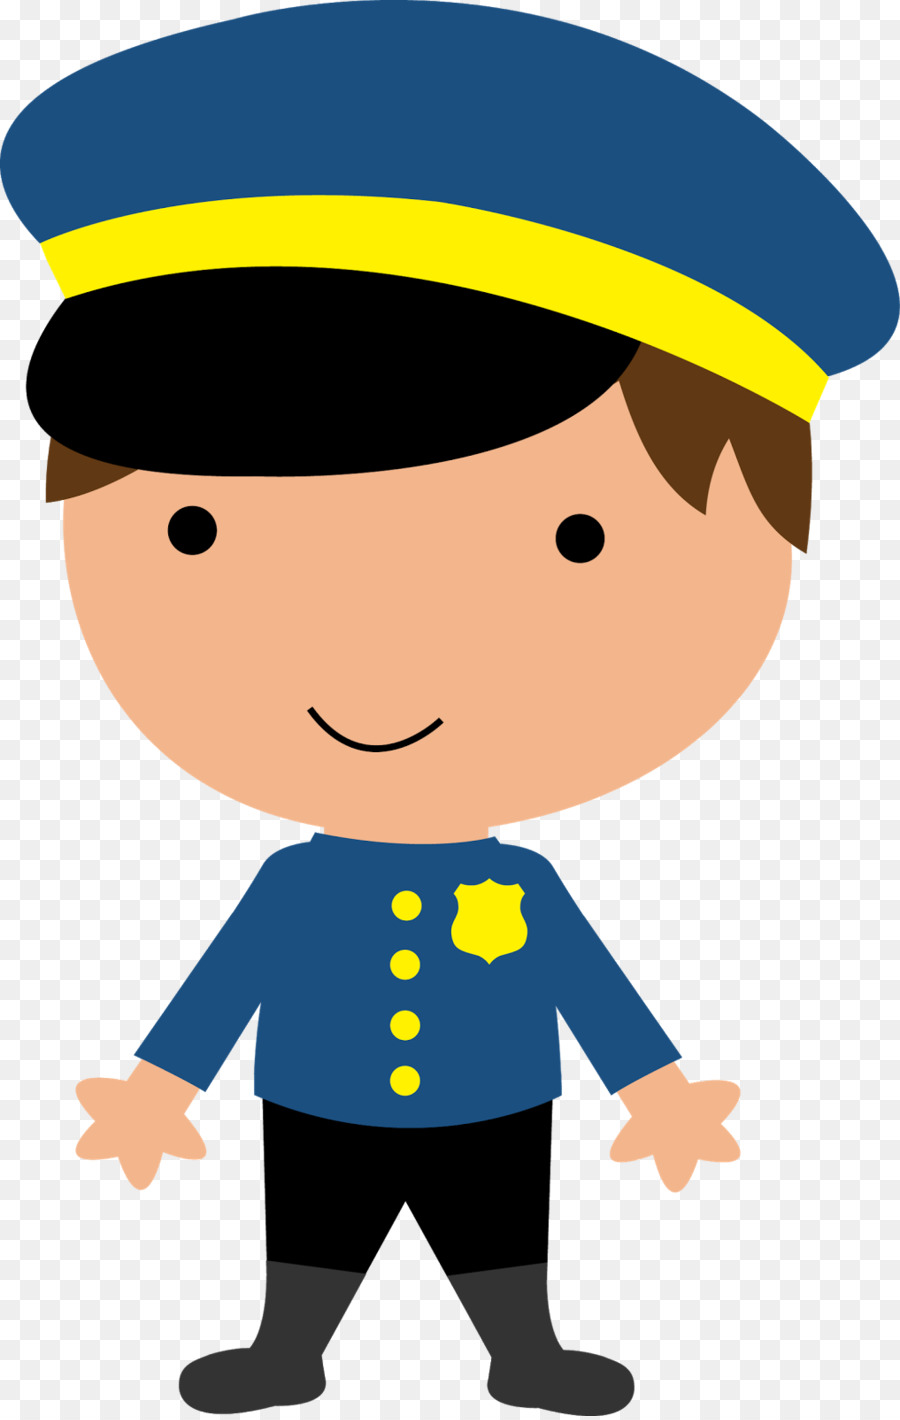 Police Cartoon png download - 1017*1600 - Free Transparent Police ...